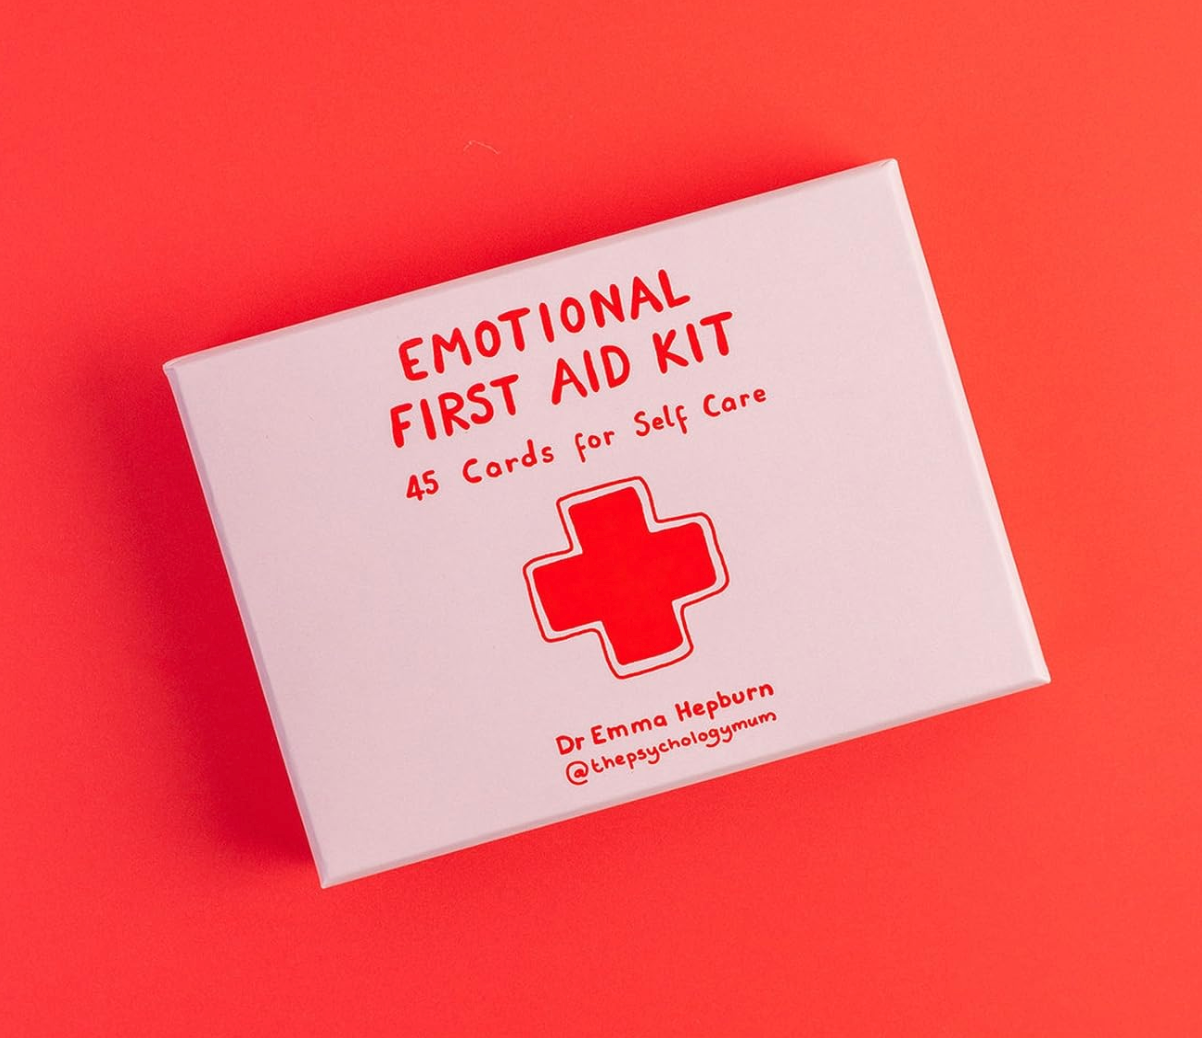 Emotional First Aid: Cards For Self-Care Deck - 45 cards